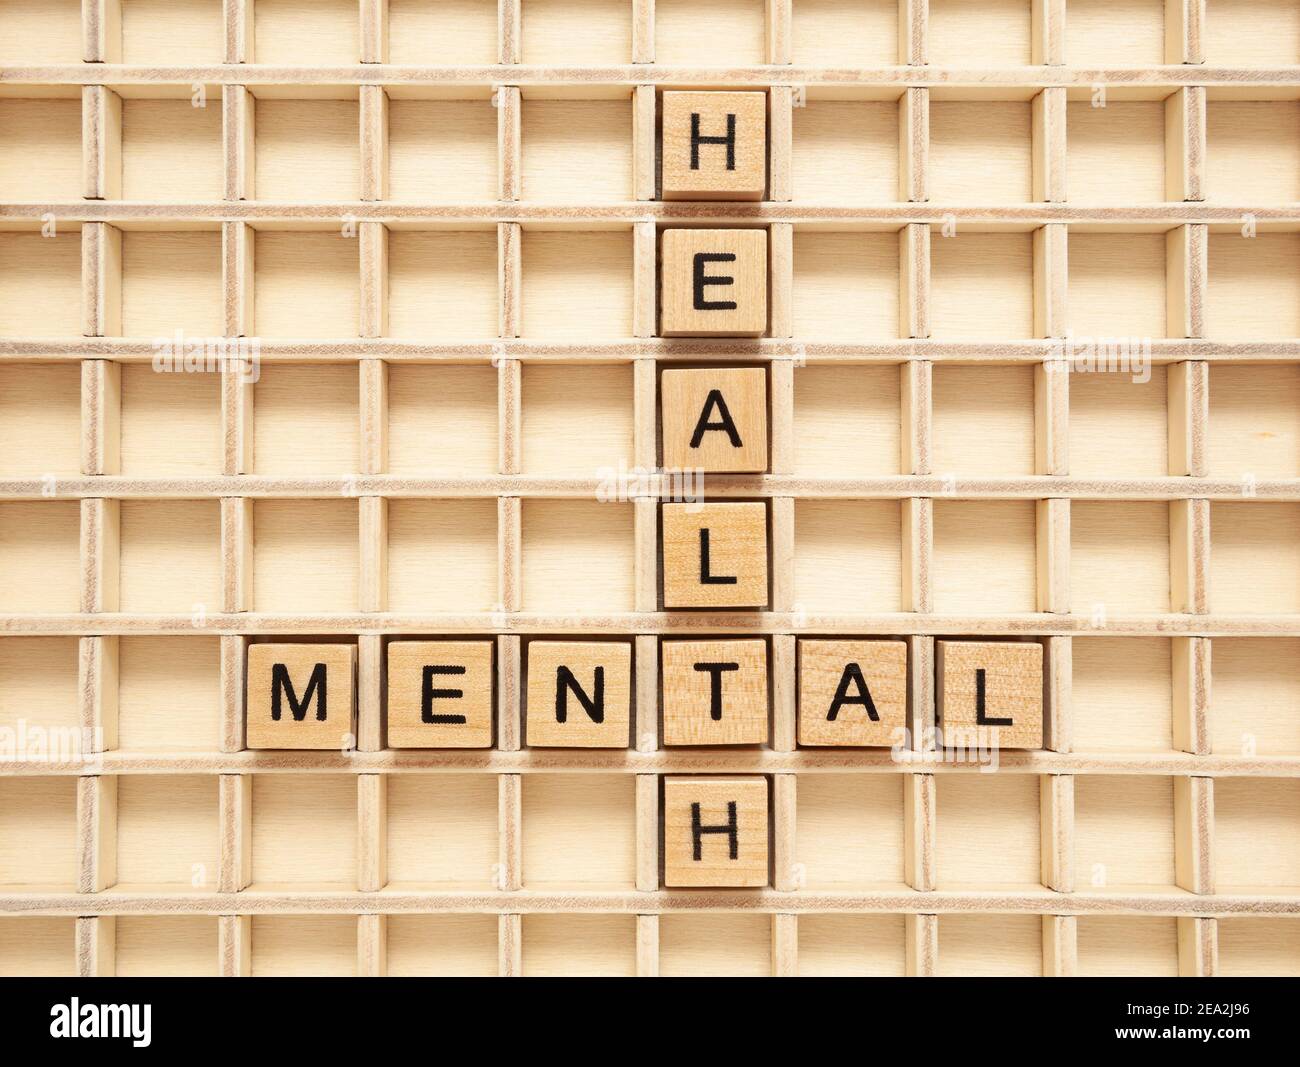 Mental Health crossword made with wooden blocks. Concept about mental illness, depression or child's mental well-being. Stock Photo